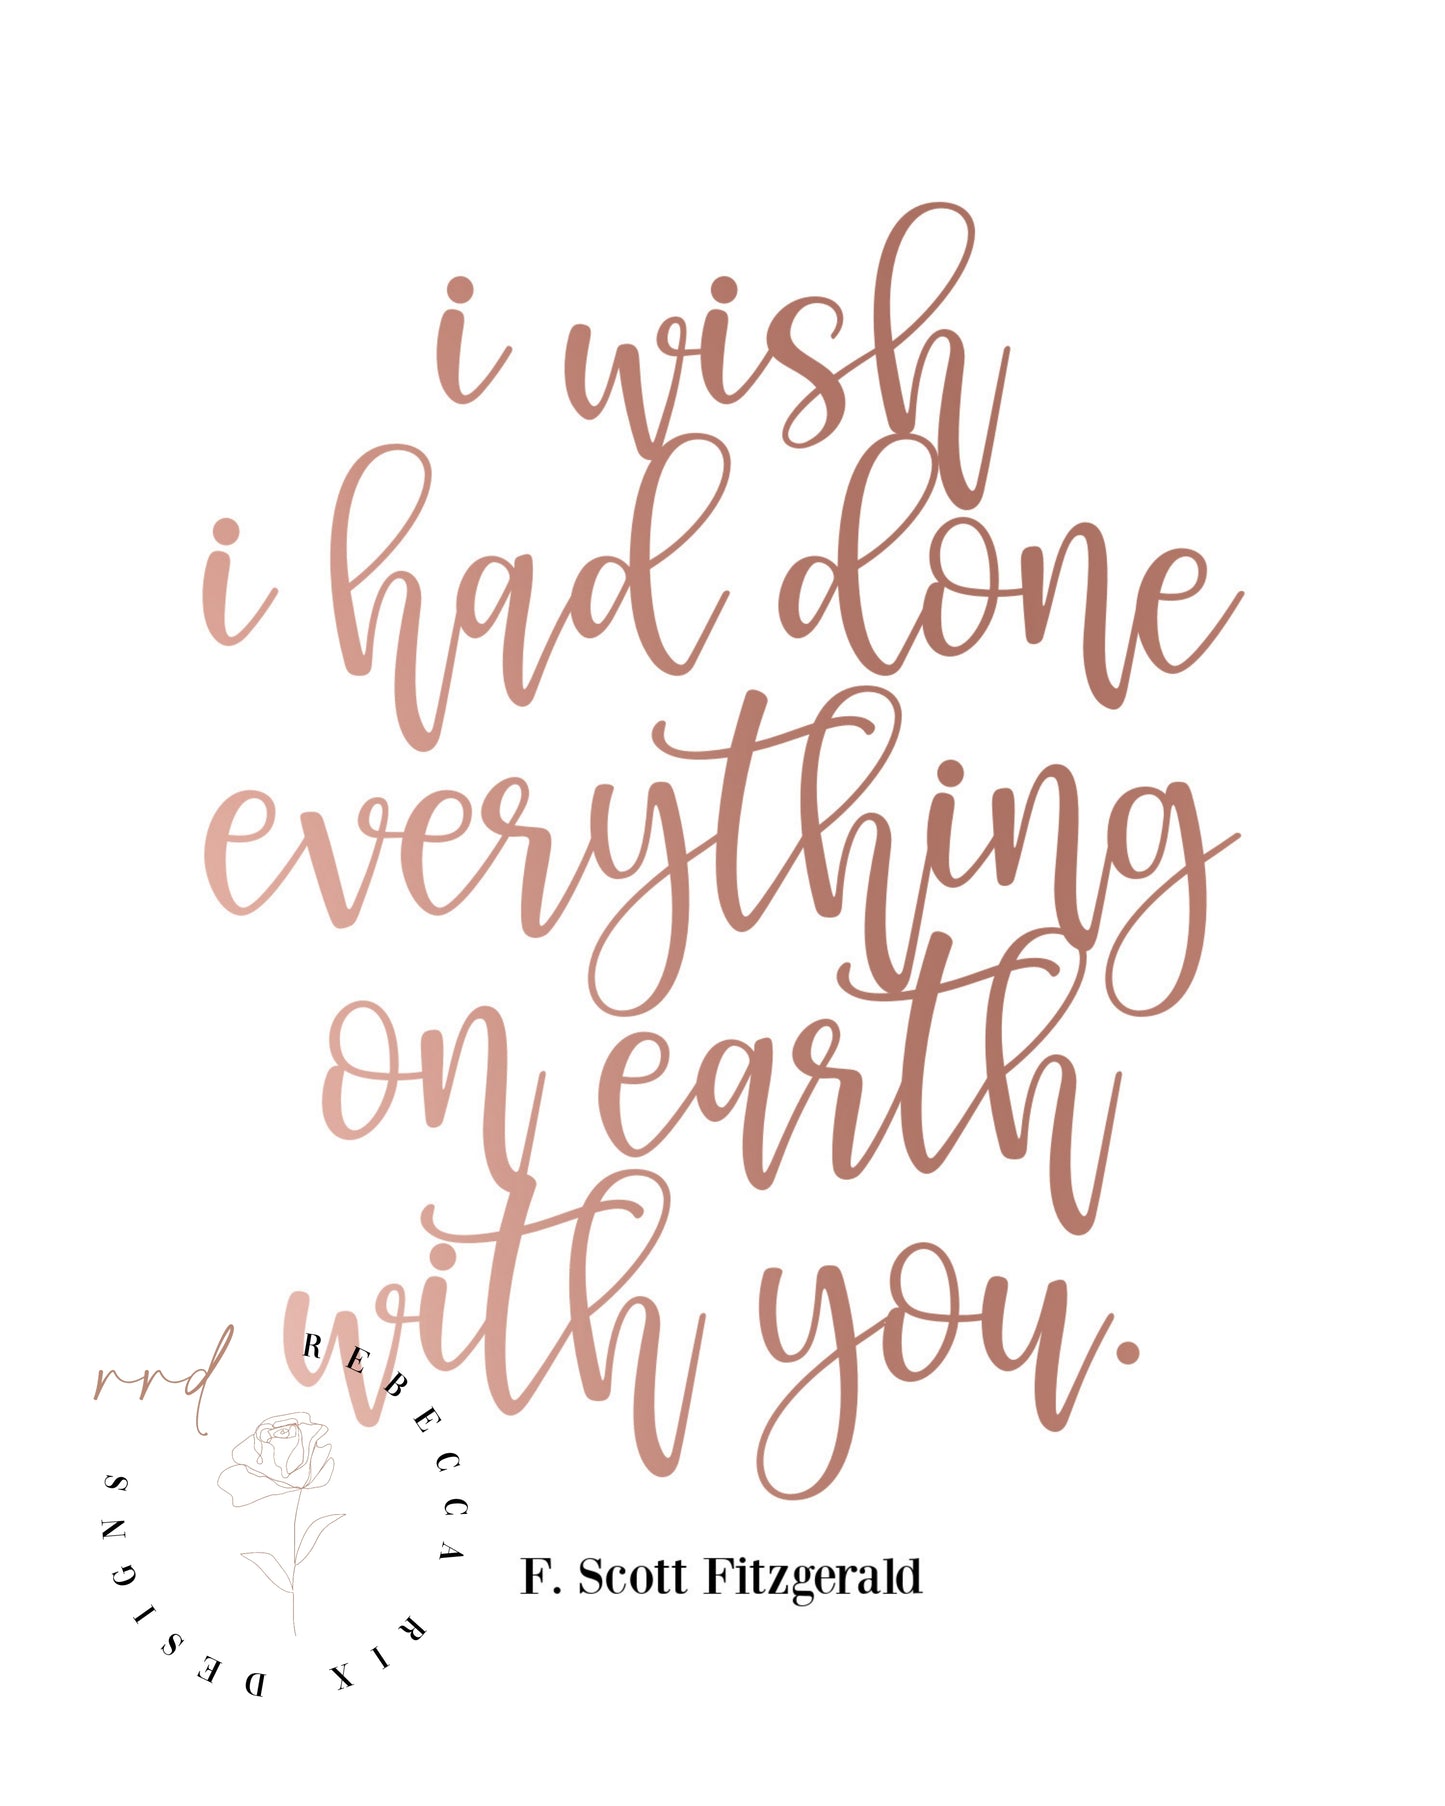 "I Wish I Had Done Everything On Earth With You" Famous Love Quote By F. Scott Fitzgerald In Rose Gold, Printable Wall Art